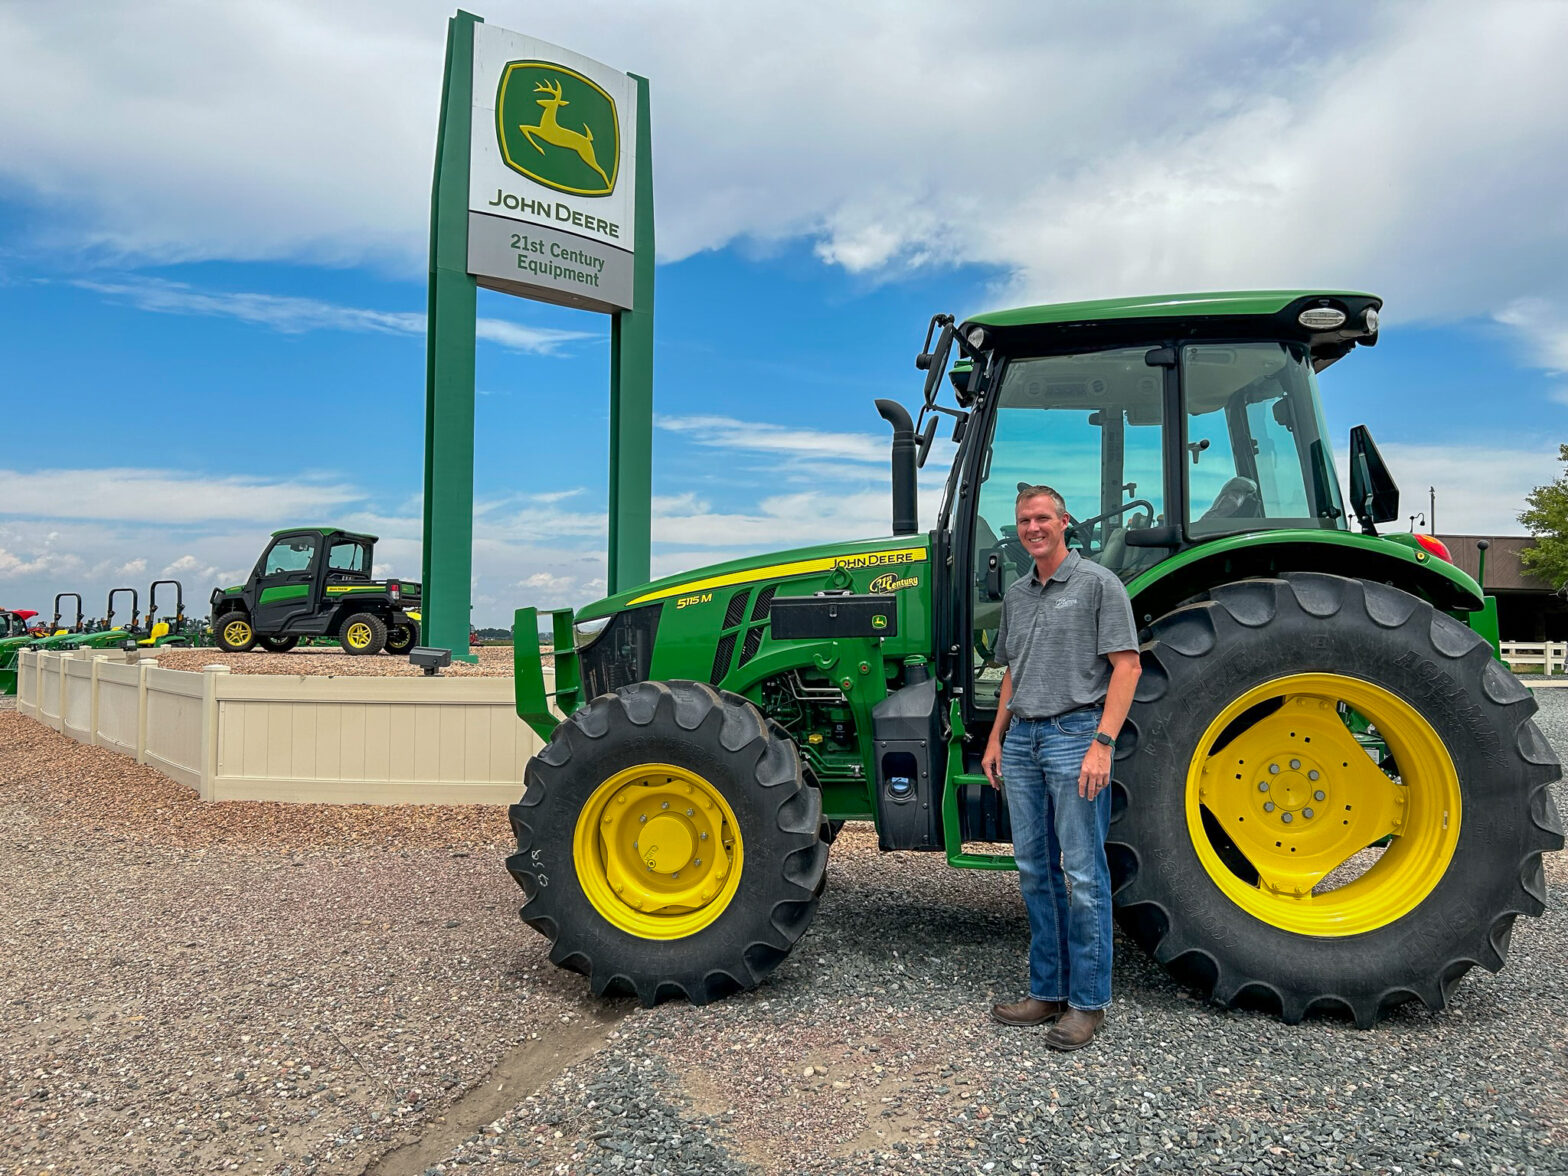 ‘A Mission to Grow’ – 21st Century Equipment names Mike Wemhoff as Vice President of Precision Ag